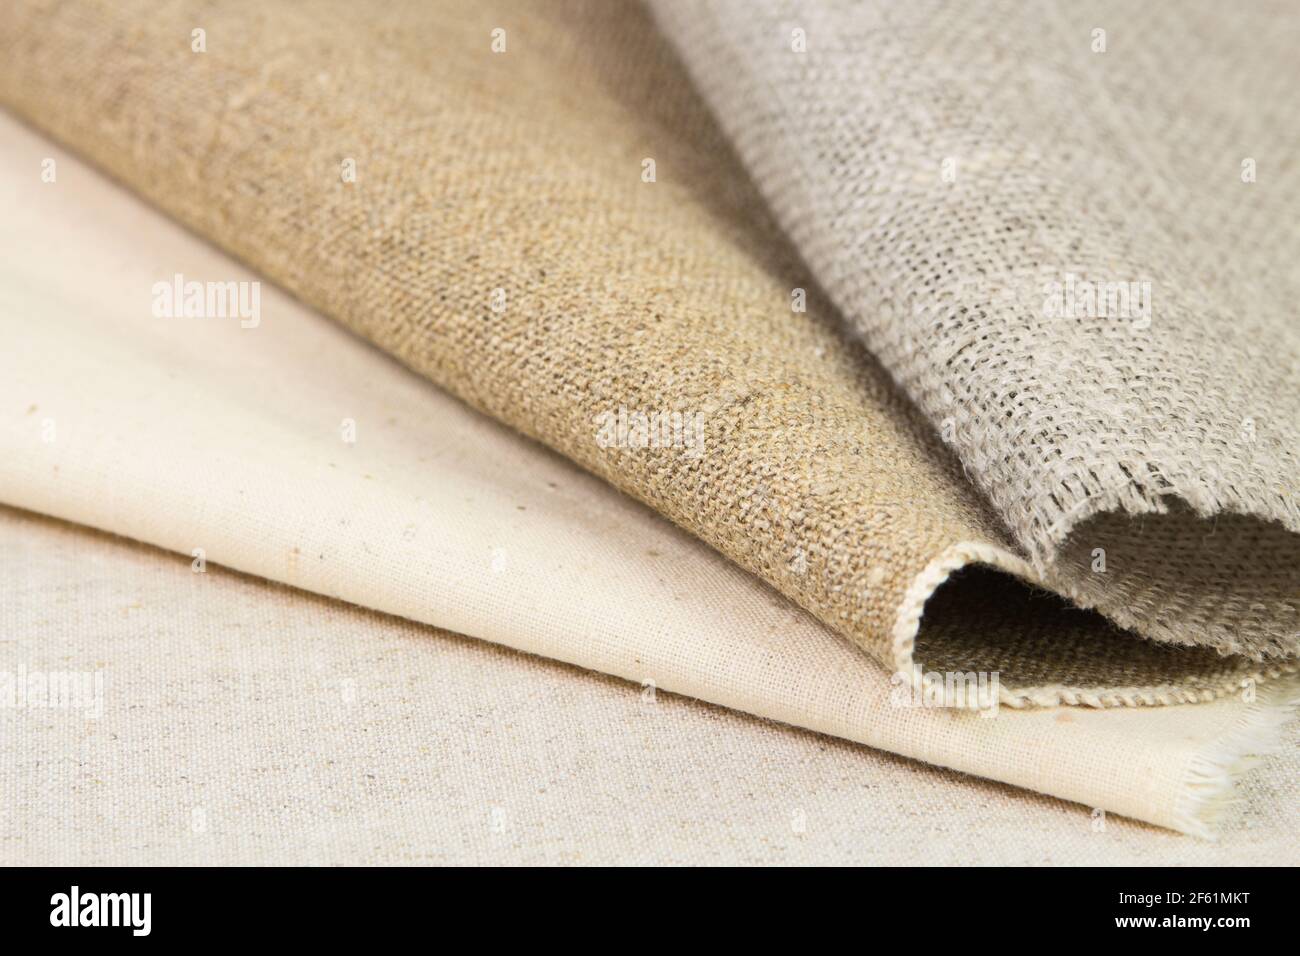 Samples of the various natural rough clothes of cotton and flax Stock Photo